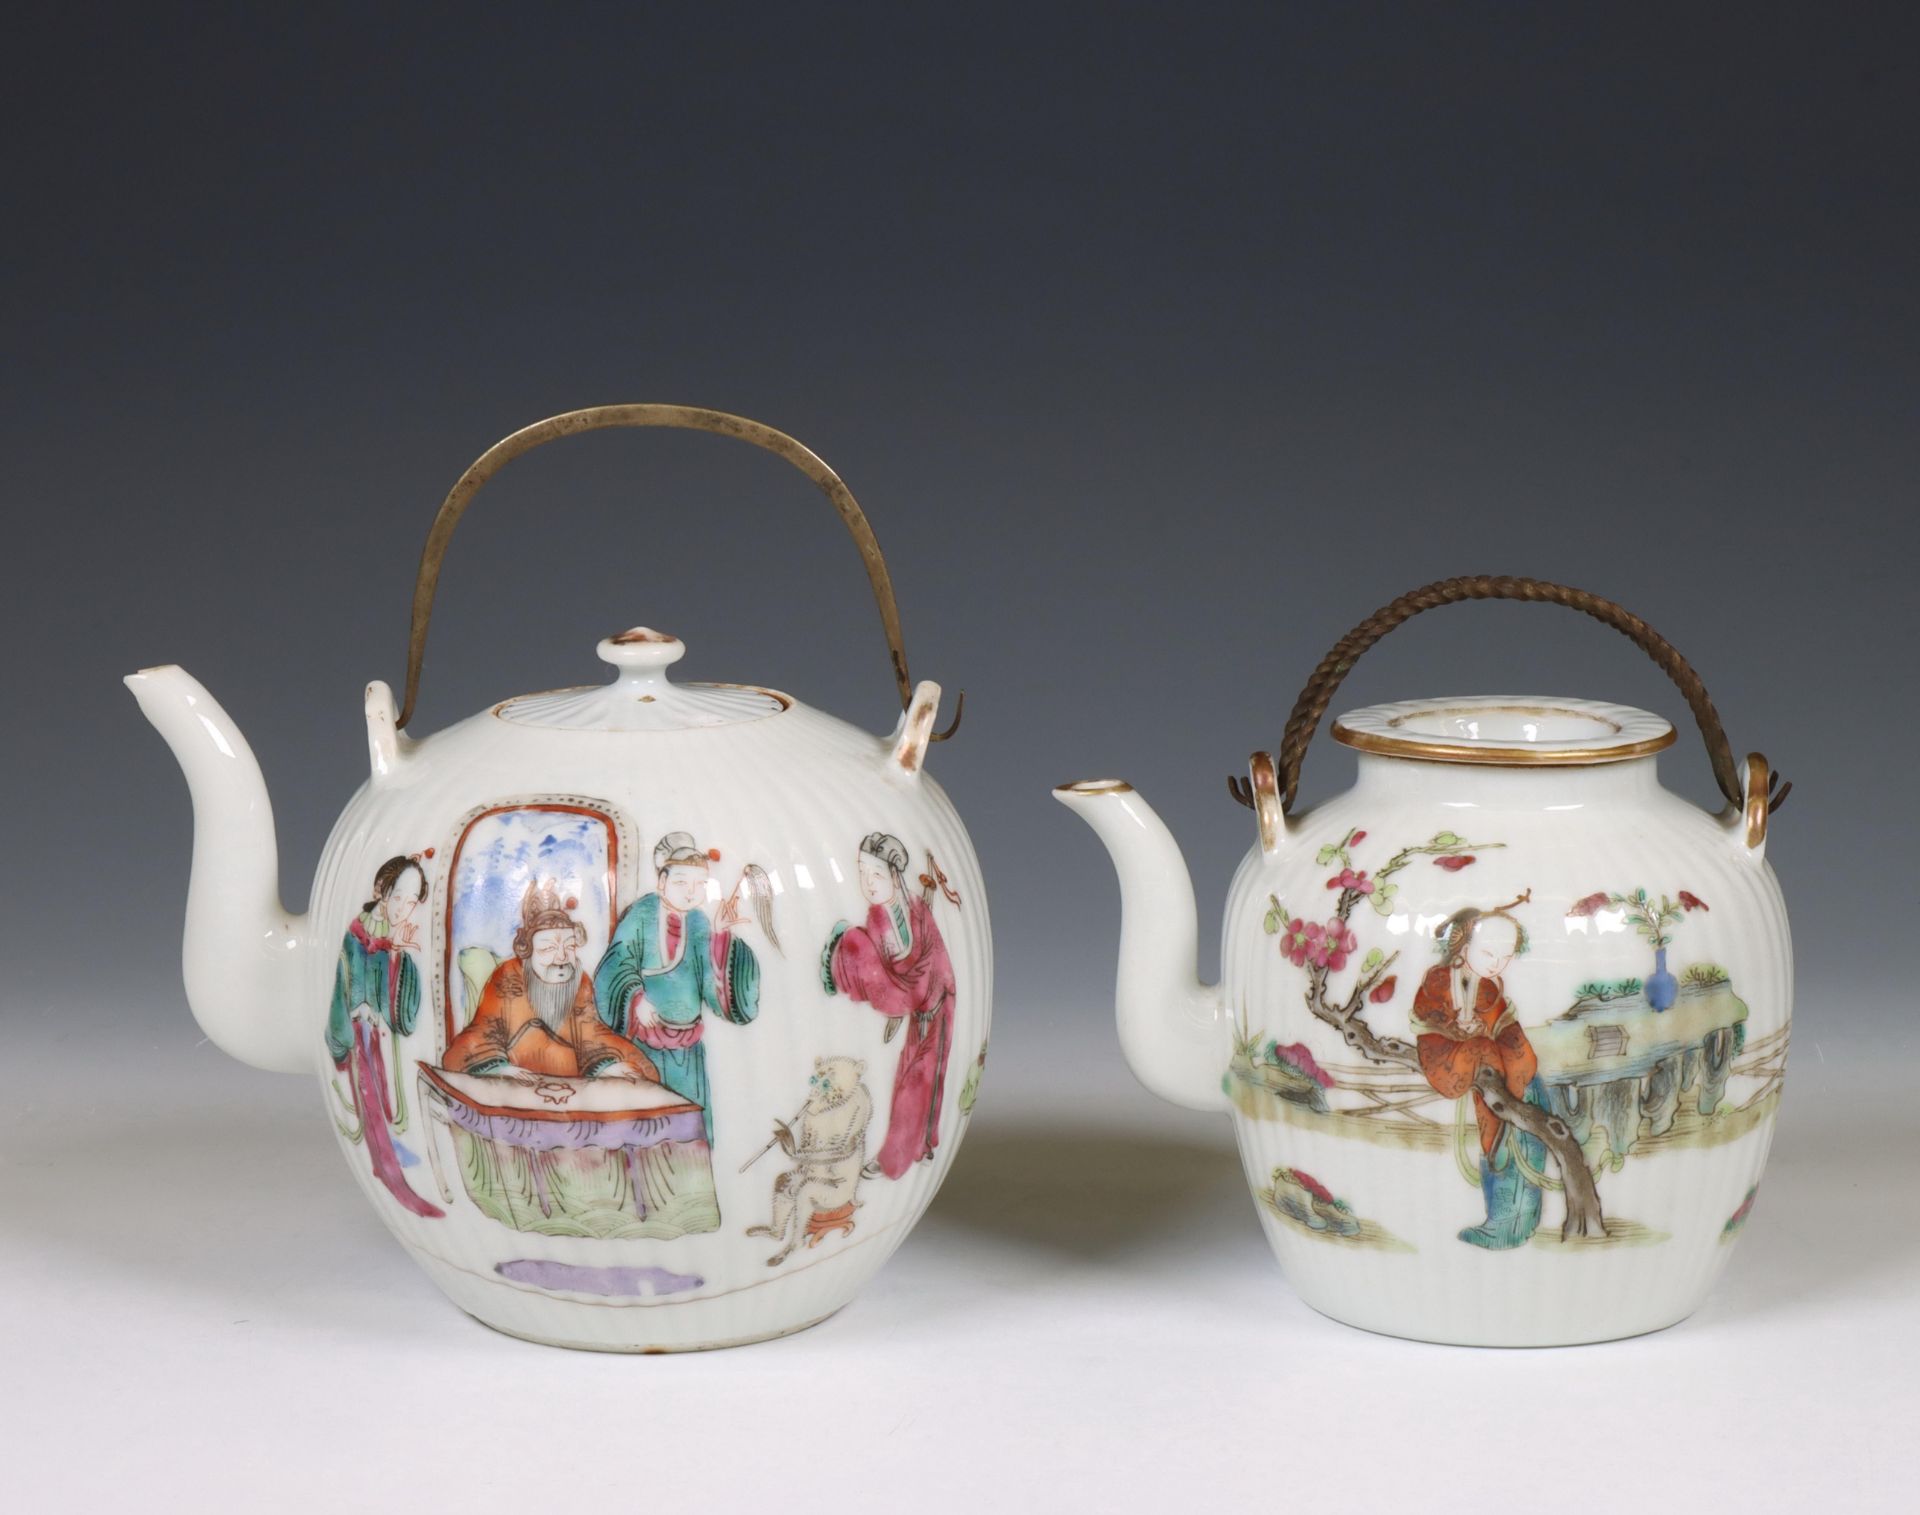 China, two famille rose porcelain ribbed teapots, 19th-20th century,